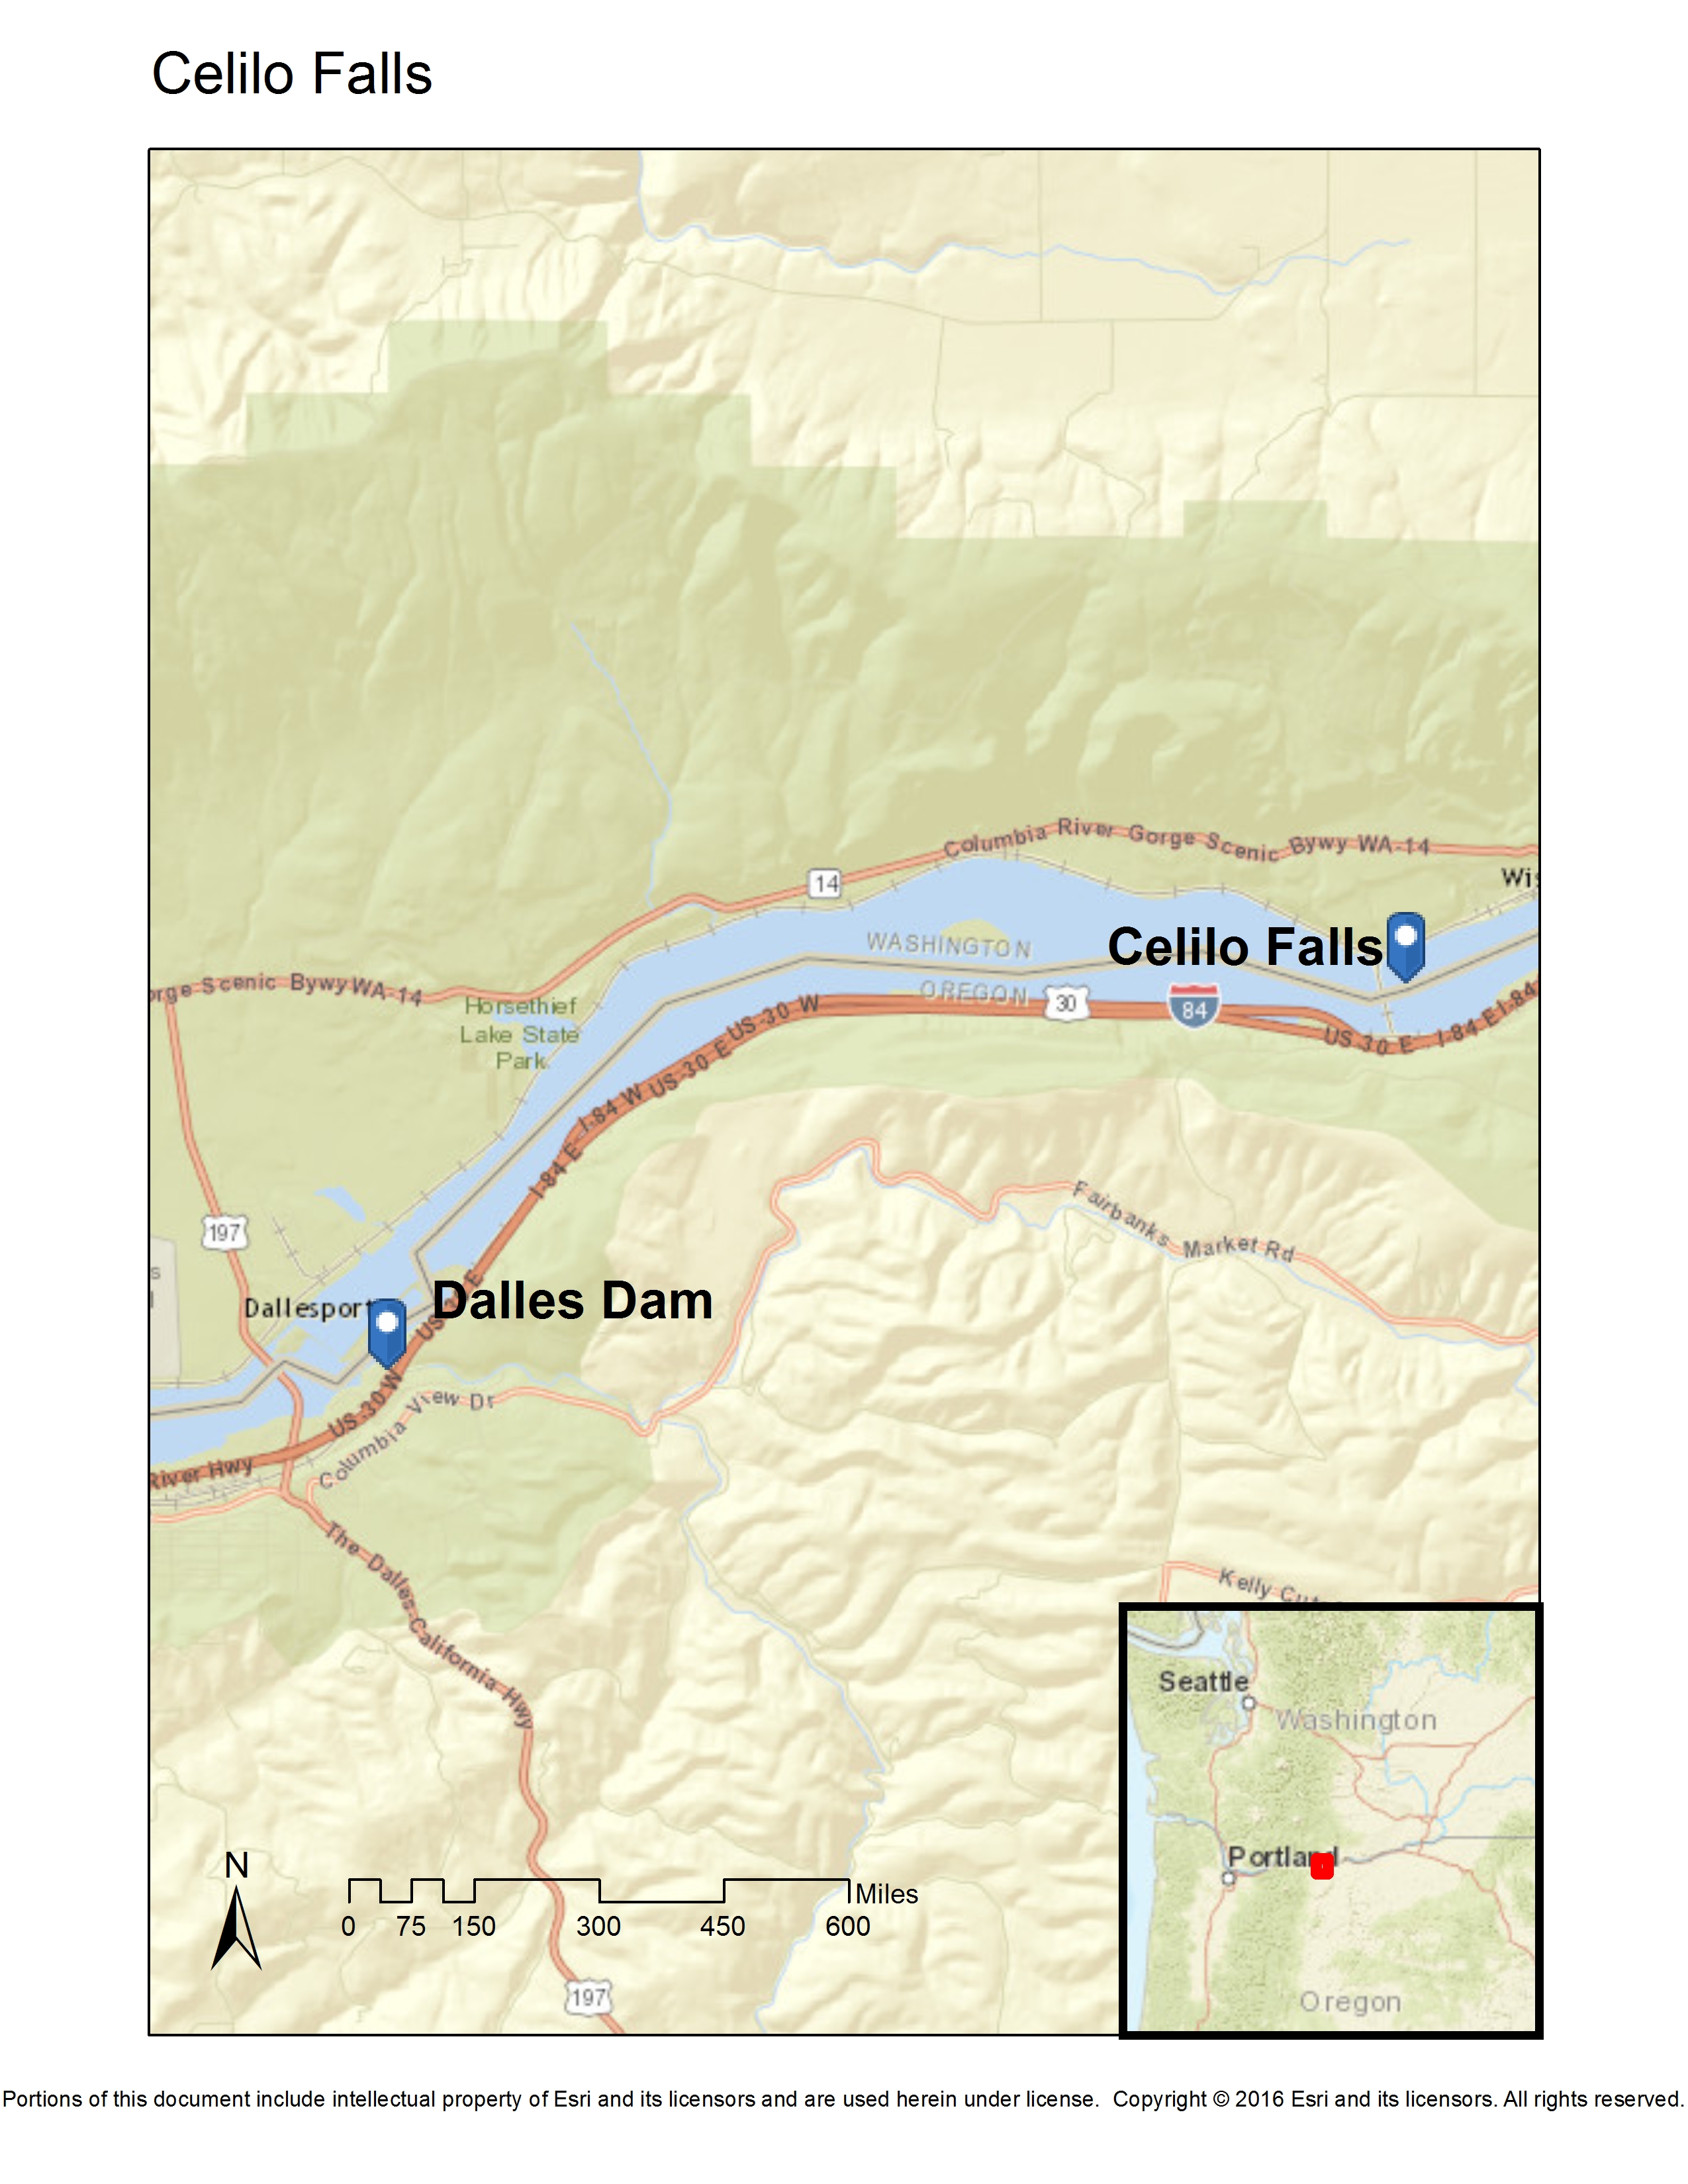 Celilo Falls, OR: Community Uprooted: Eminent Domain in the U.S.